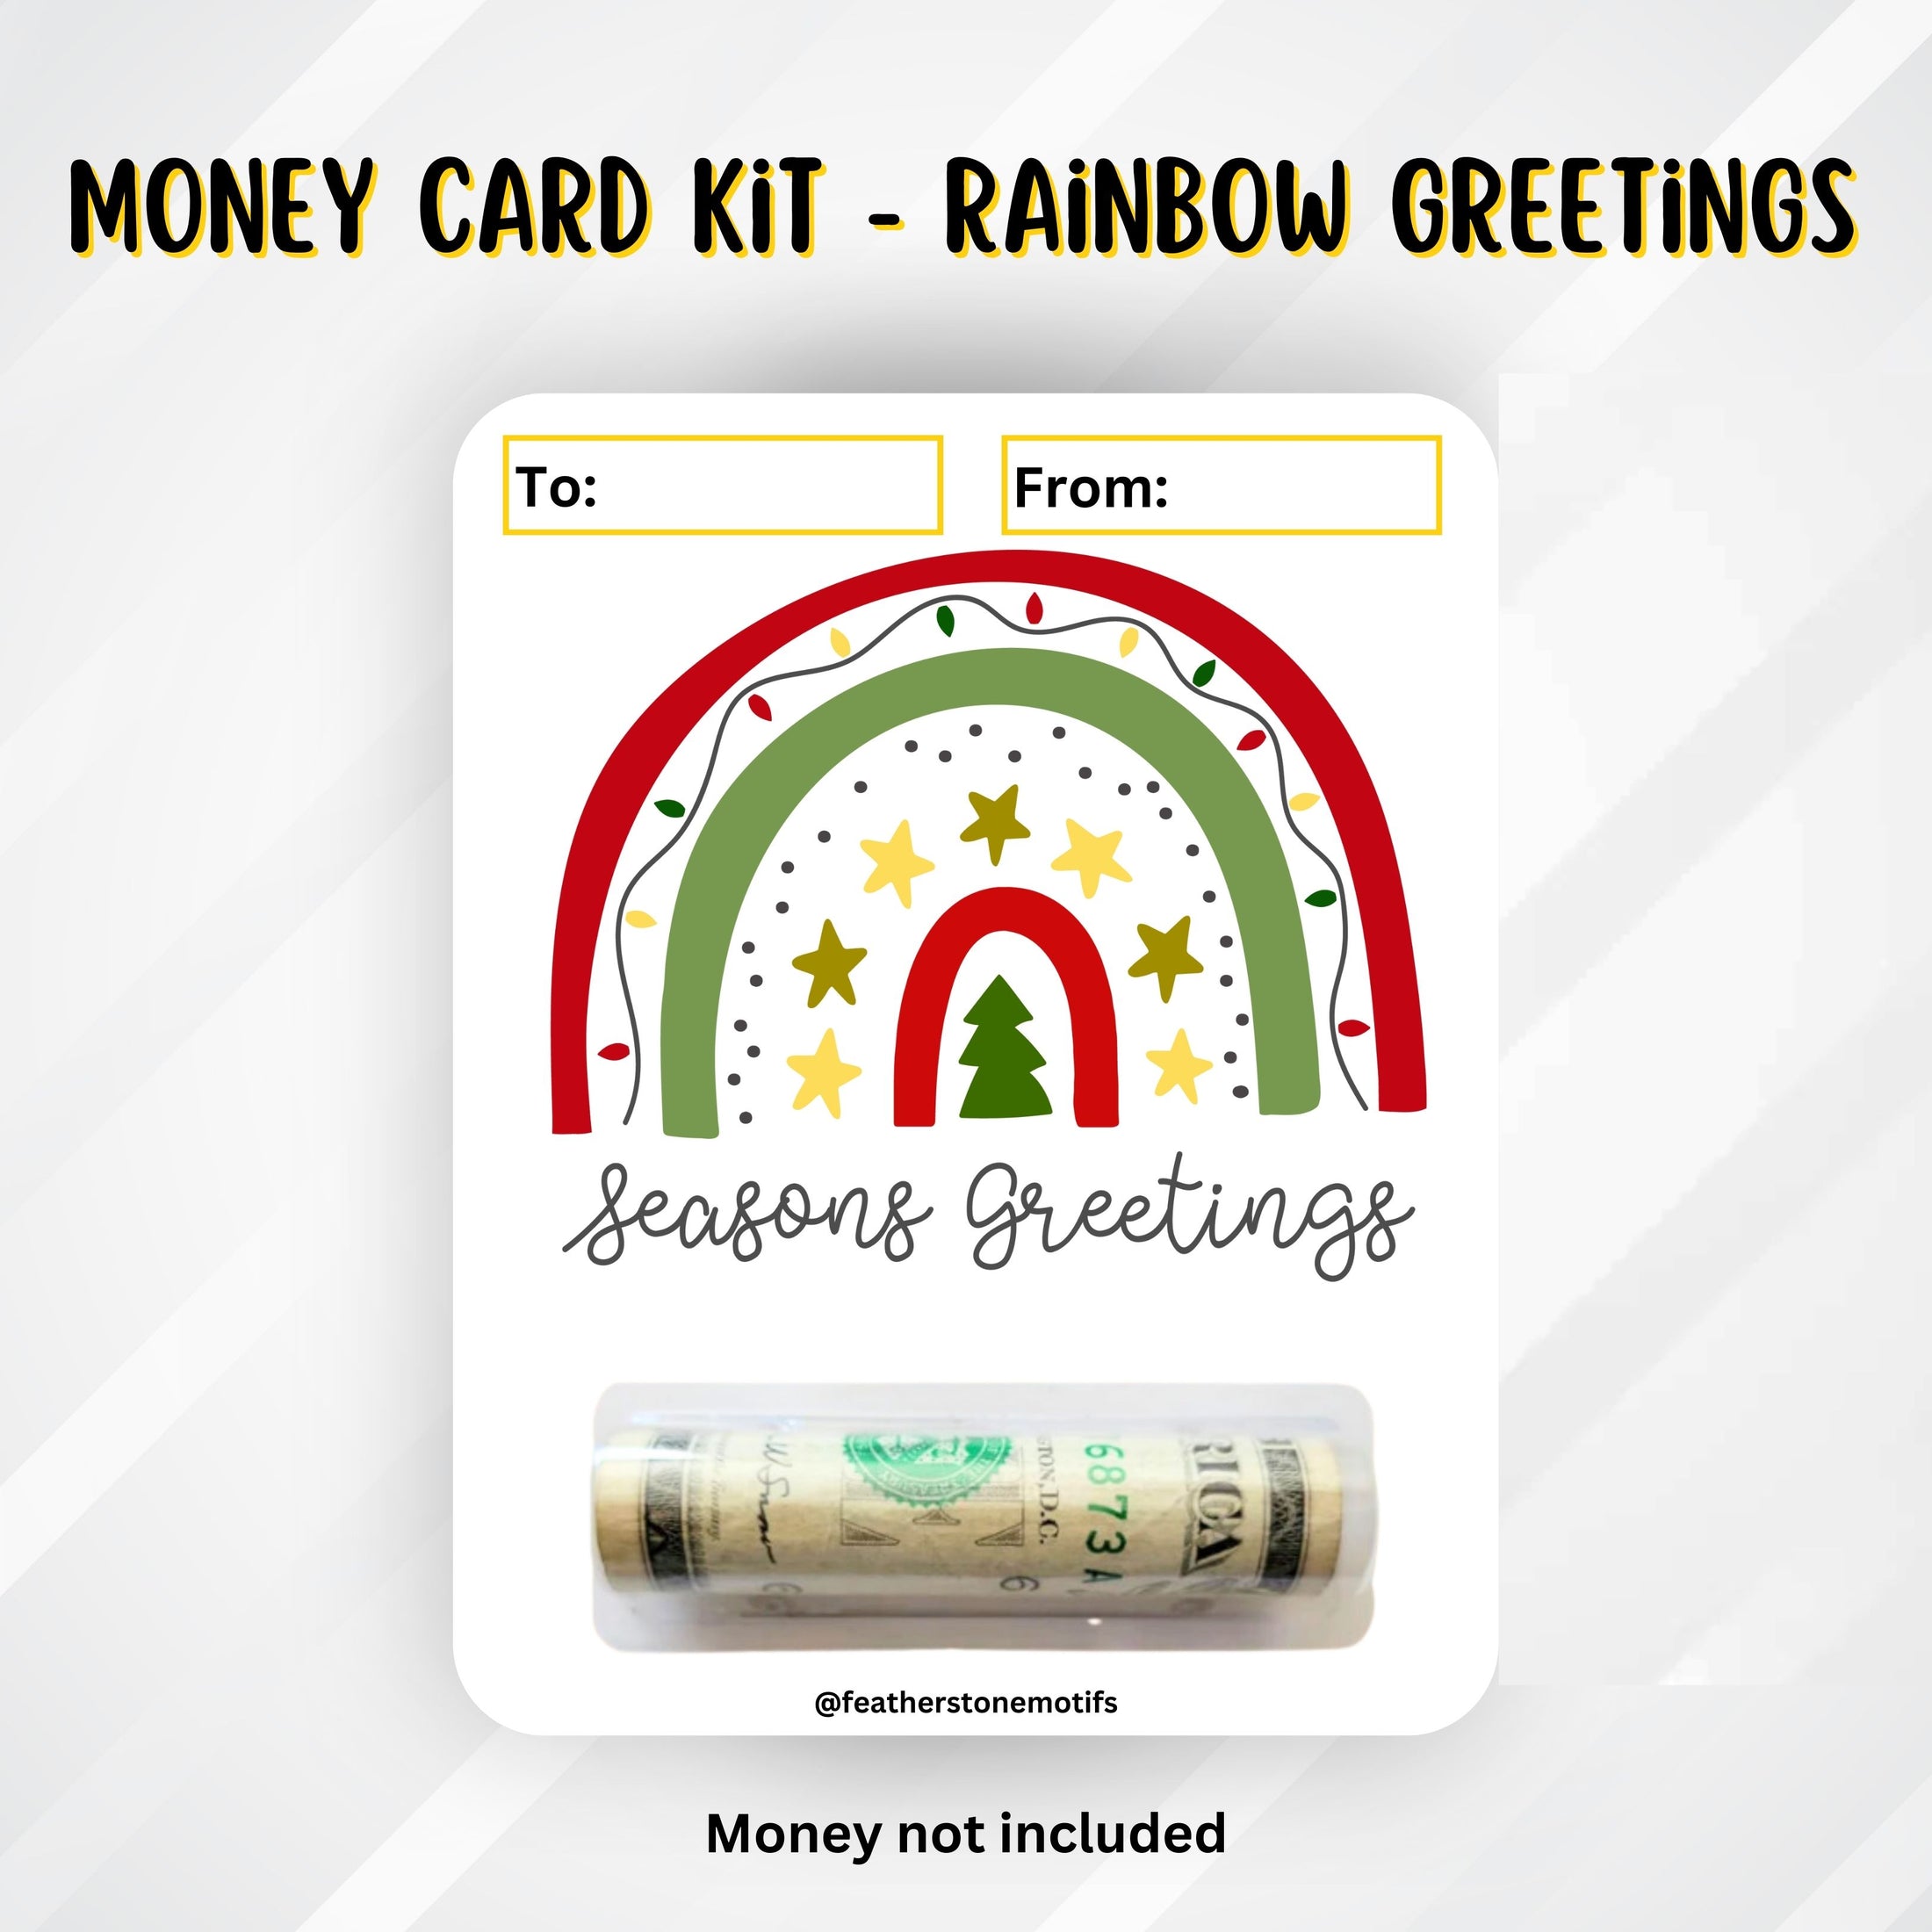 This image shows the money tube attached to the Rainbow Greetings money card.